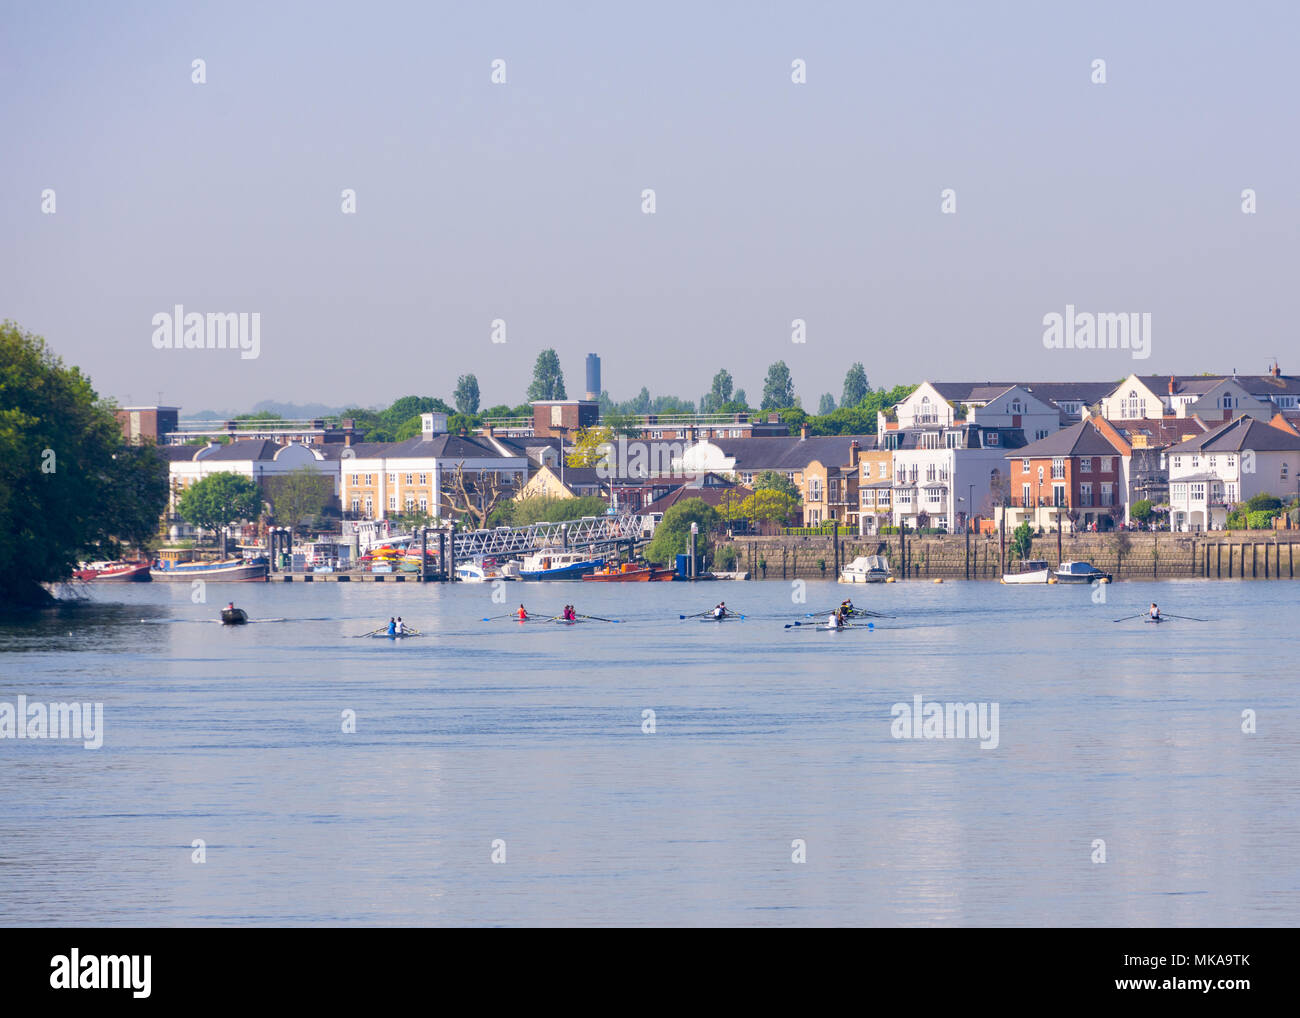 Hammersmith, London, UK. 07 May, 2018: This bank holiday weekend is expected to be one of the hottest on record and also the hottest day of the year so far. In London, rowers make the most of the weather along the Thames Path. Credit: Bradley Smith/Alamy Live News. Stock Photo